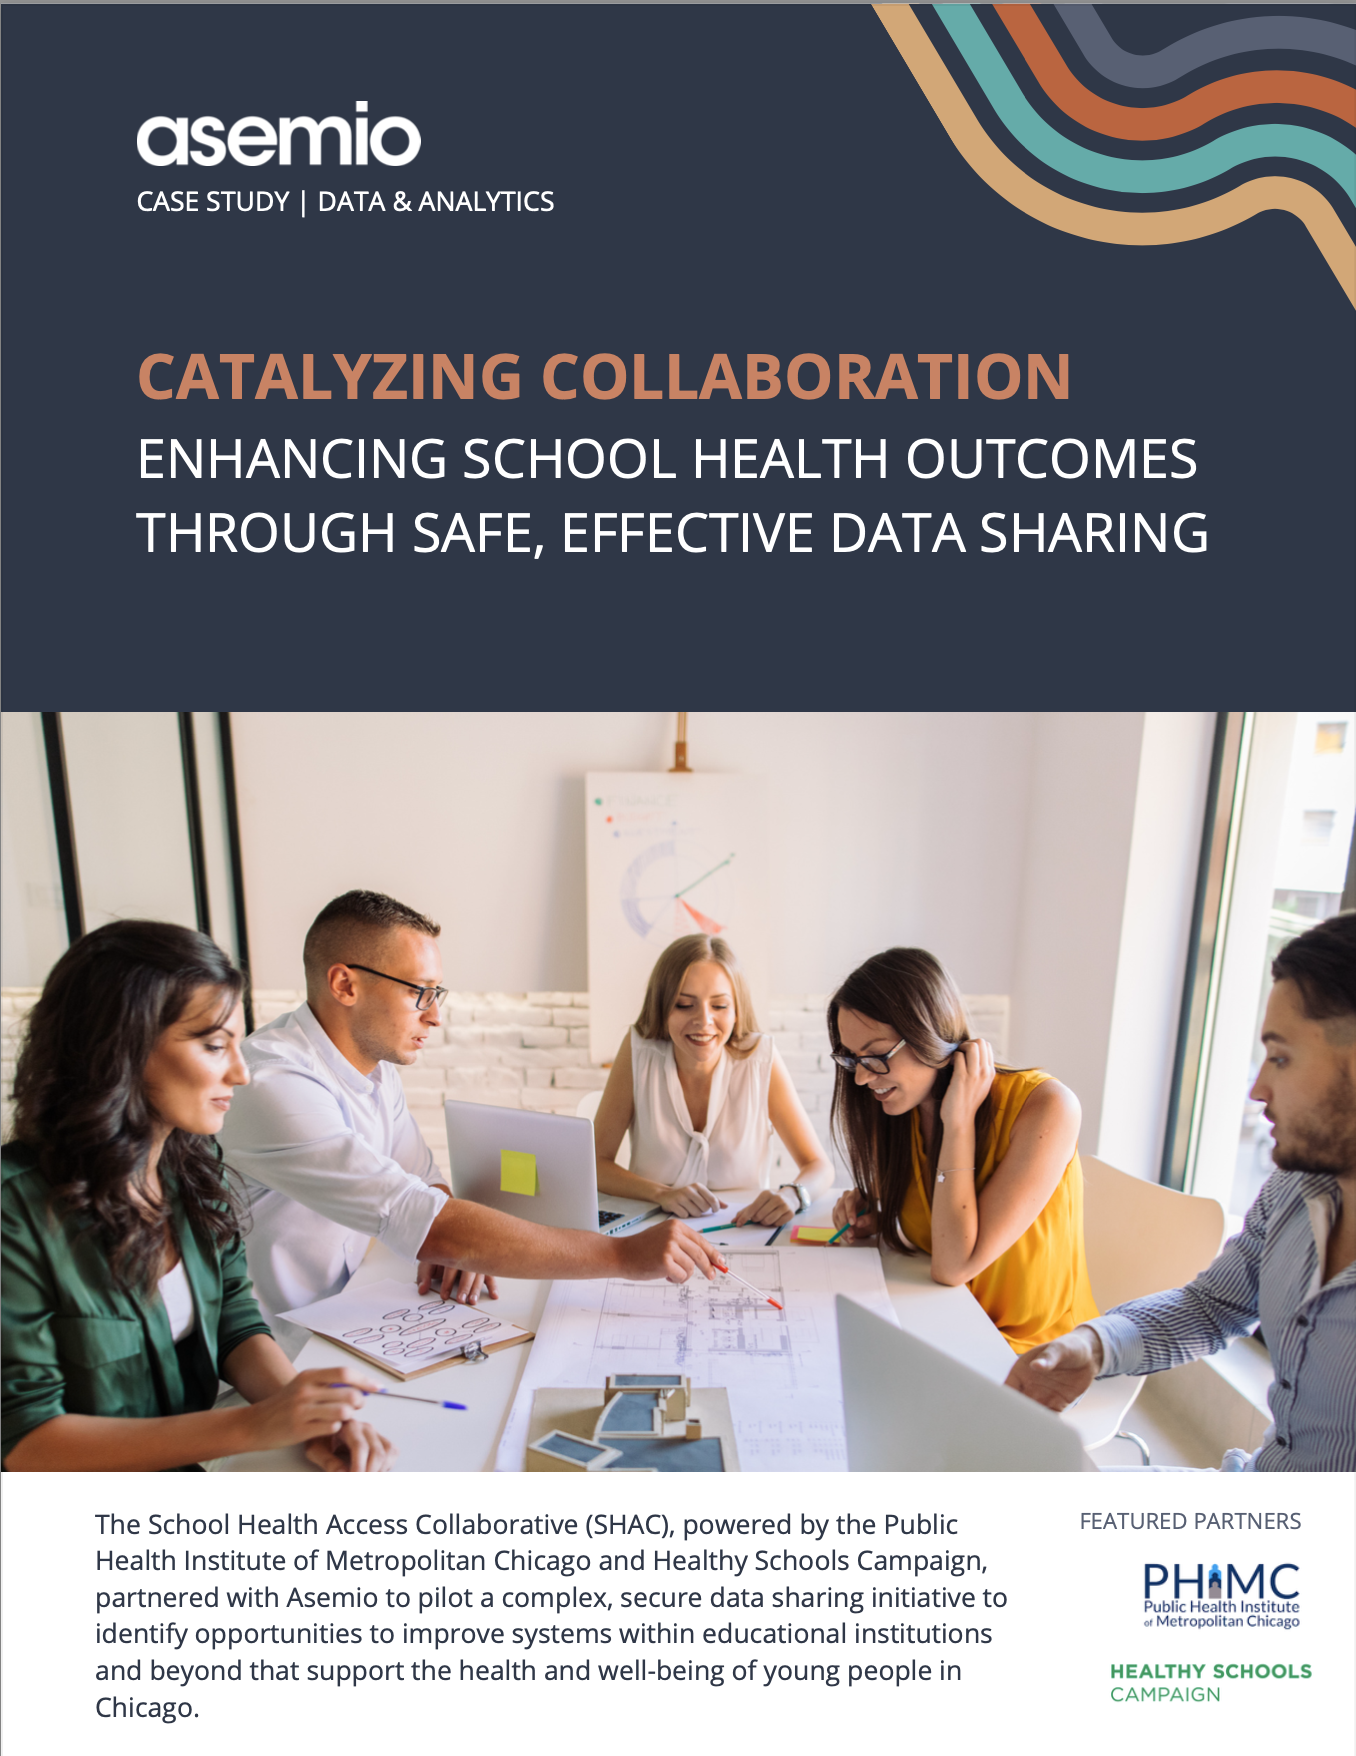 Case study cover that reads: "CATALYZING COLLABORATION: ENHANCING SCHOOL HEALTH OUTCOMES THROUGH SAFE, EFFECTIVE DATA SHARING"